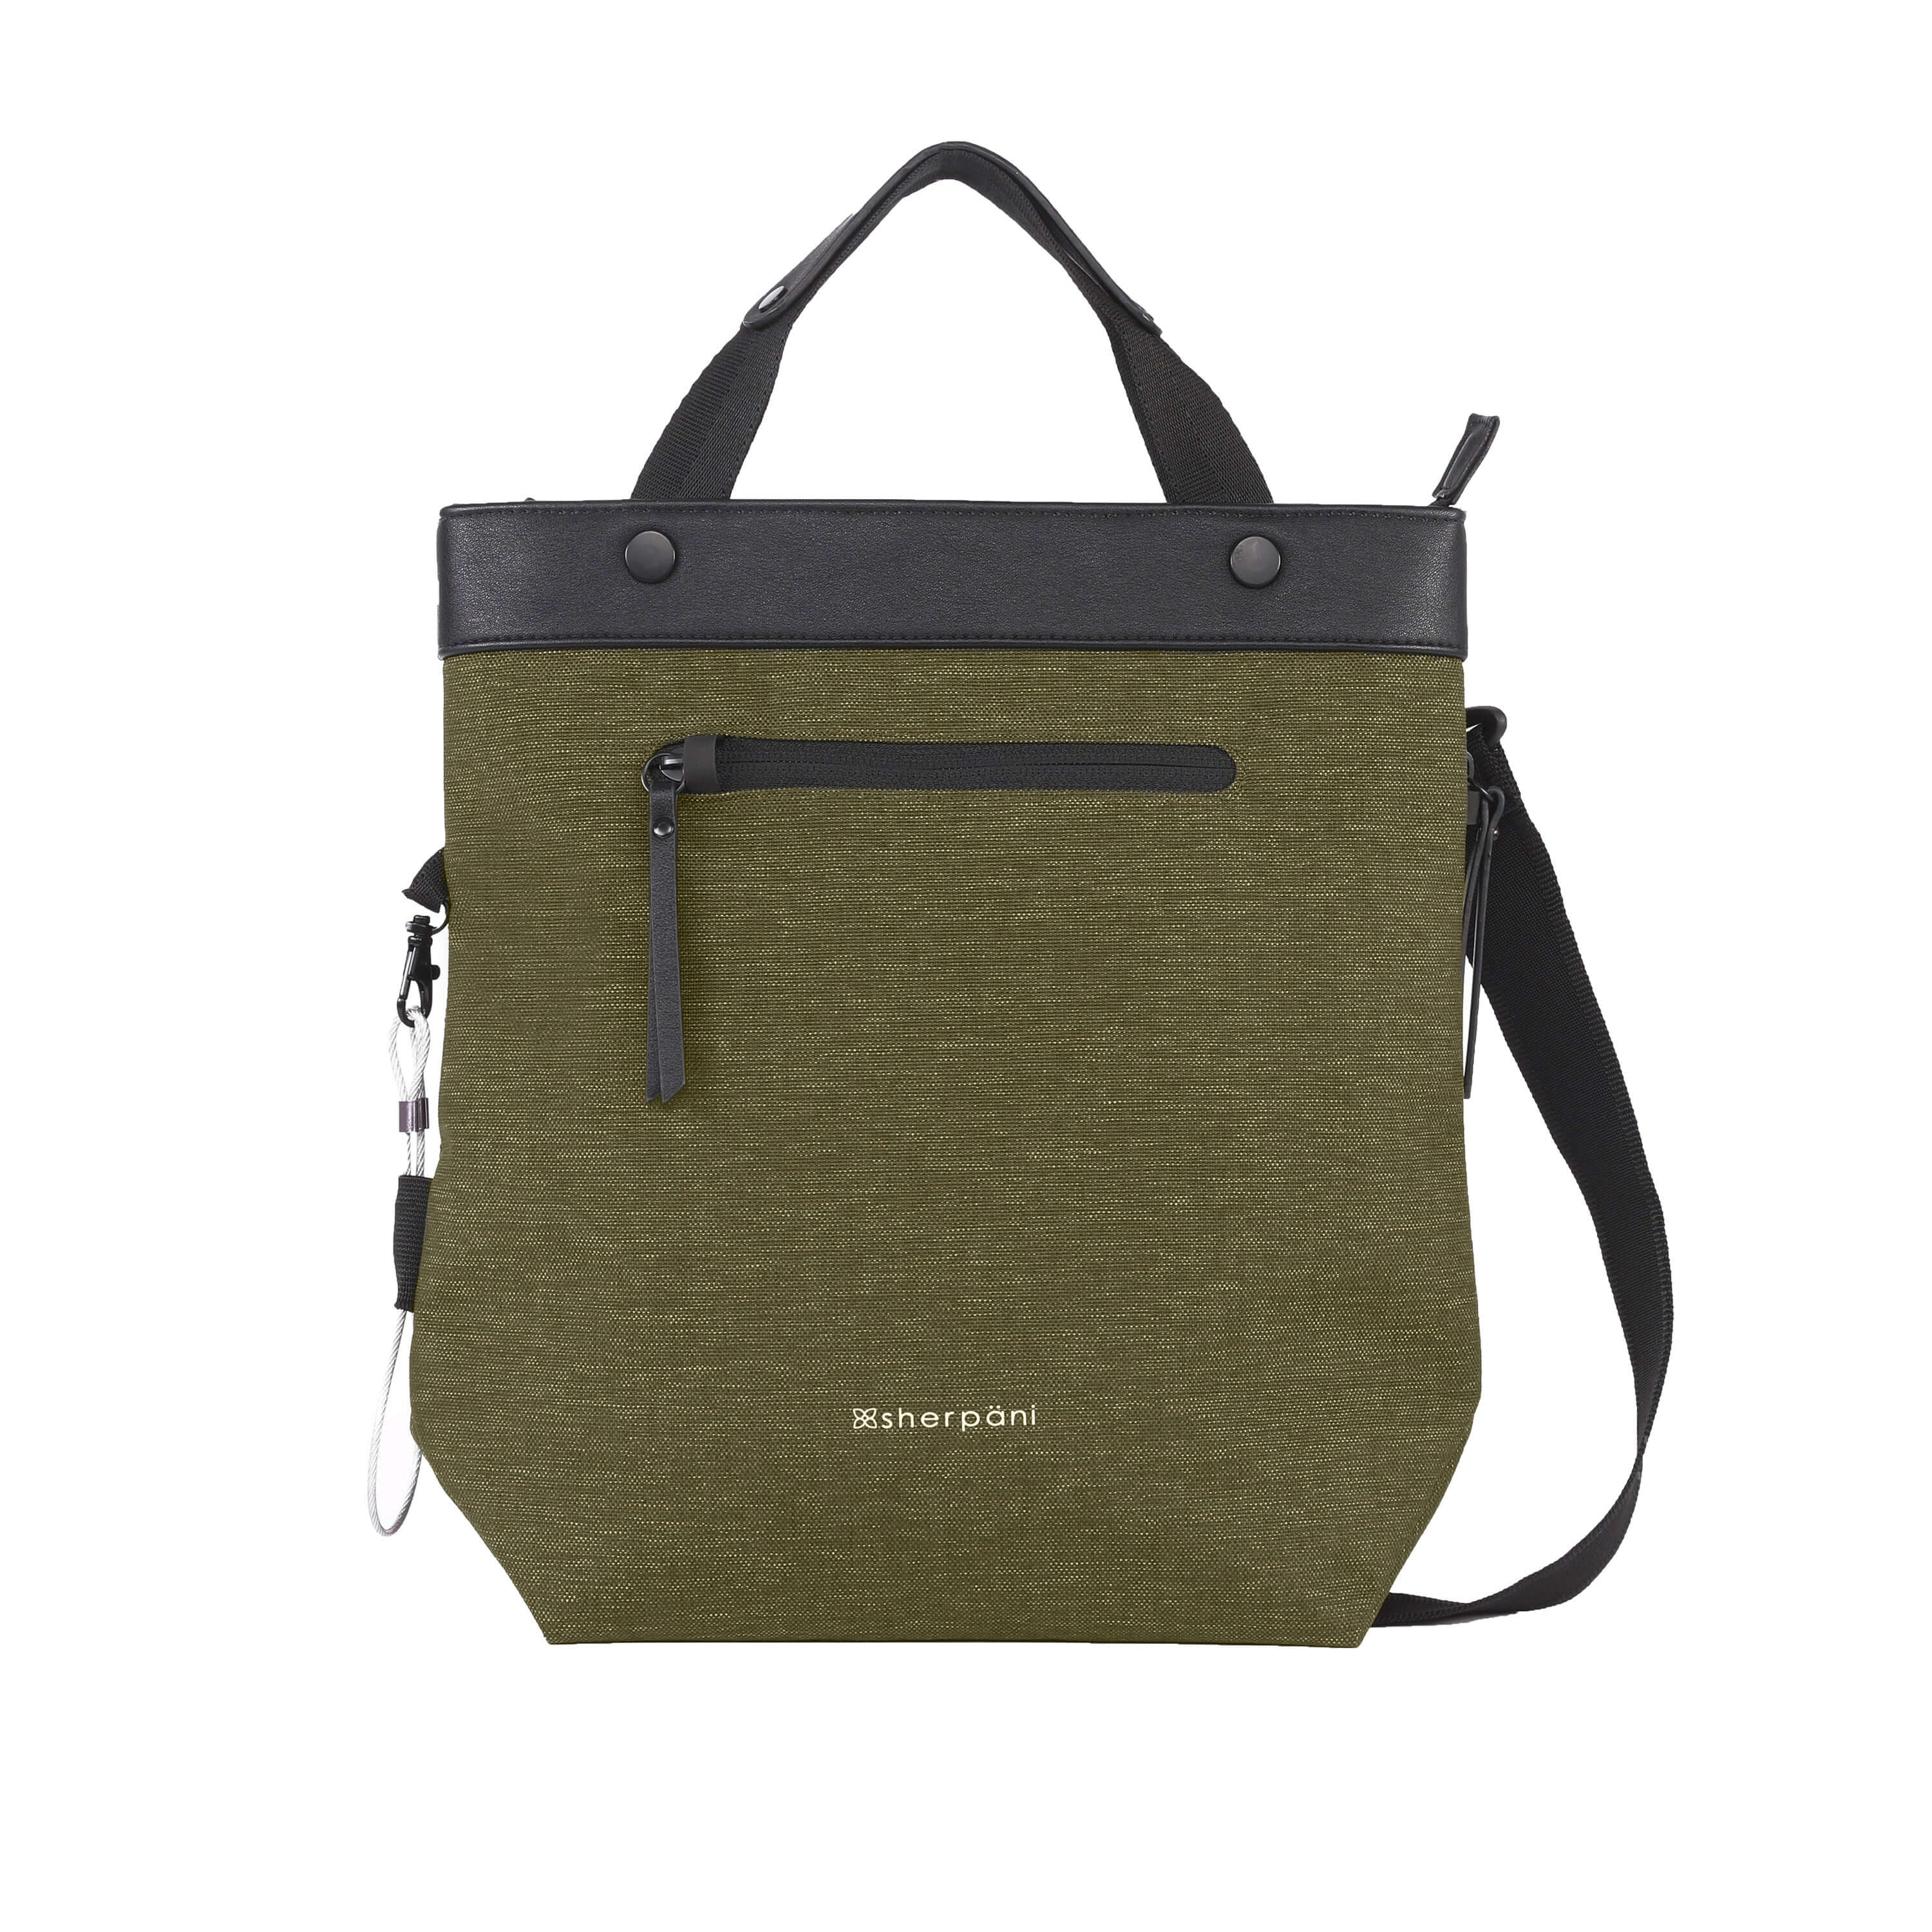 Flat front view of Sherpani's Anti-Theft bag, the Geo AT in Loden, with vegan leather accents in black. The bag features short tote handles and an adjustable/detachable crossbody strap. There is a locking zipper compartment on the front. A chair loop lock is clipped to the side and secured in place by an elastic tab. 